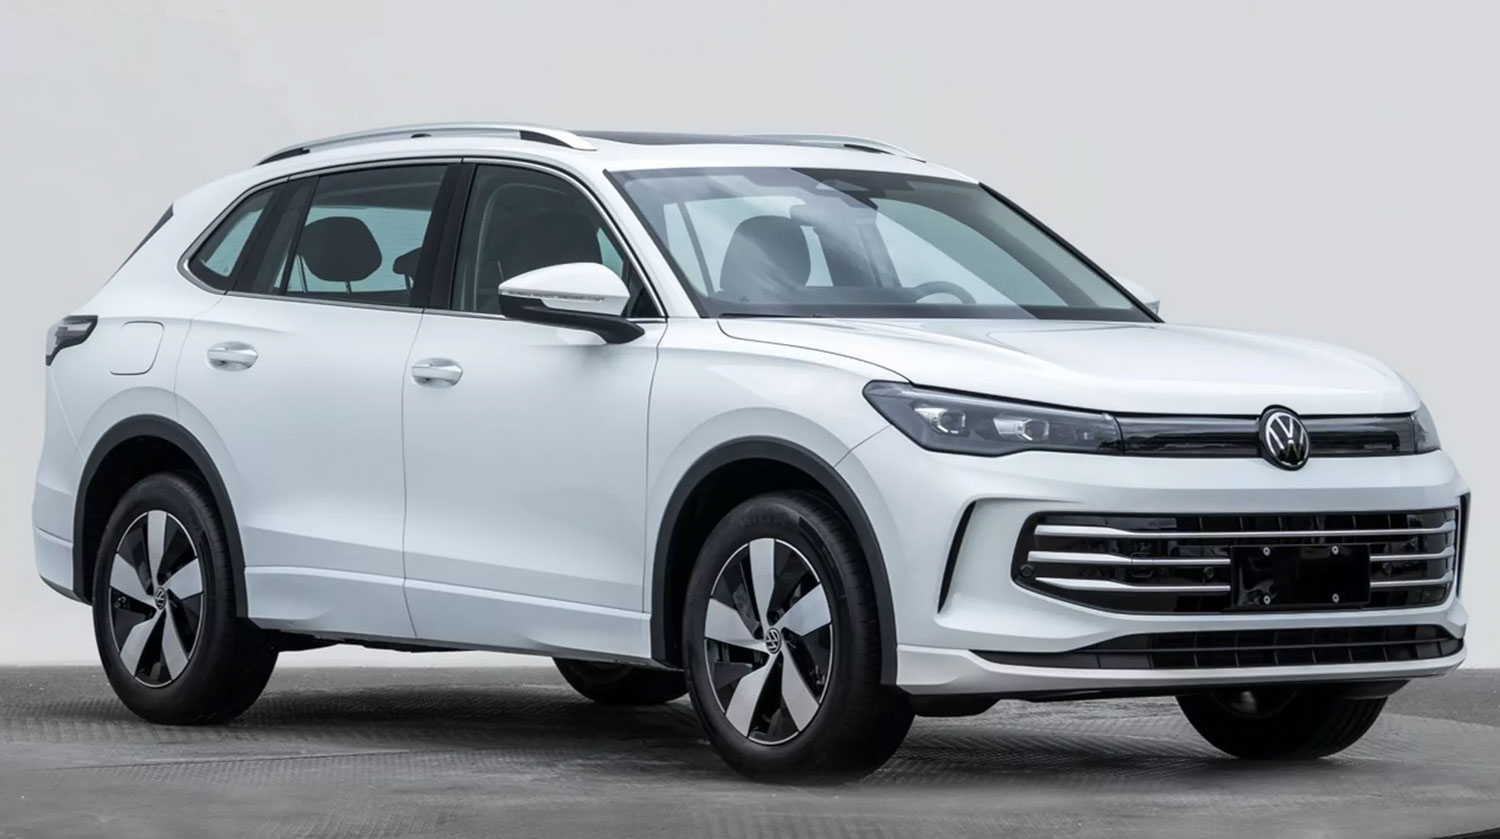 VW unveils new Tiguan with plug-in hybrid, petrol and diesel options